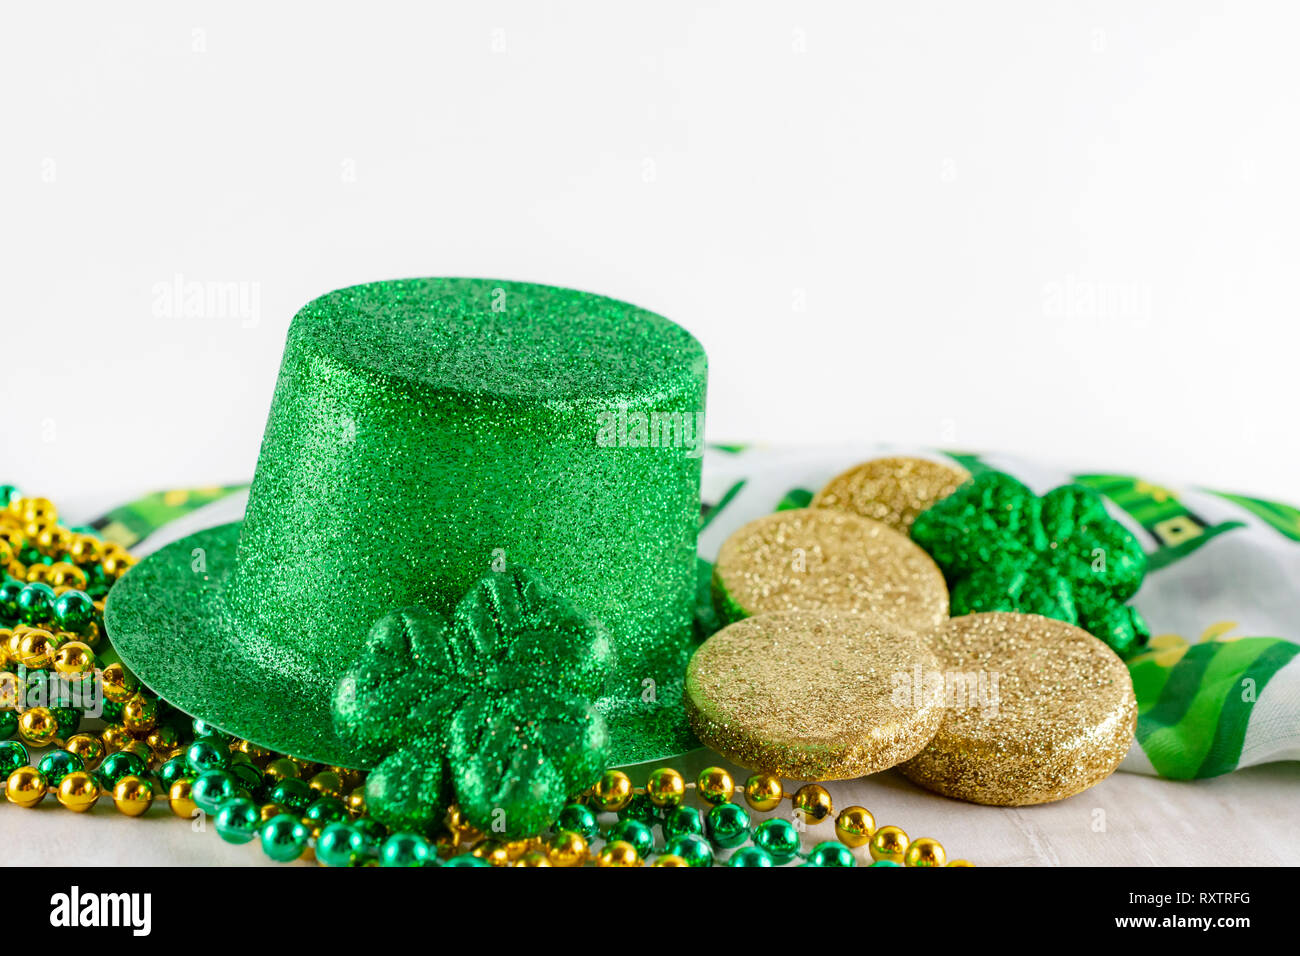 Saint Patrick's Day green top hat with gold coins, gold and green beads, green shamrock, and colorful scarf.  White background.  Plenty of copy space. Stock Photo